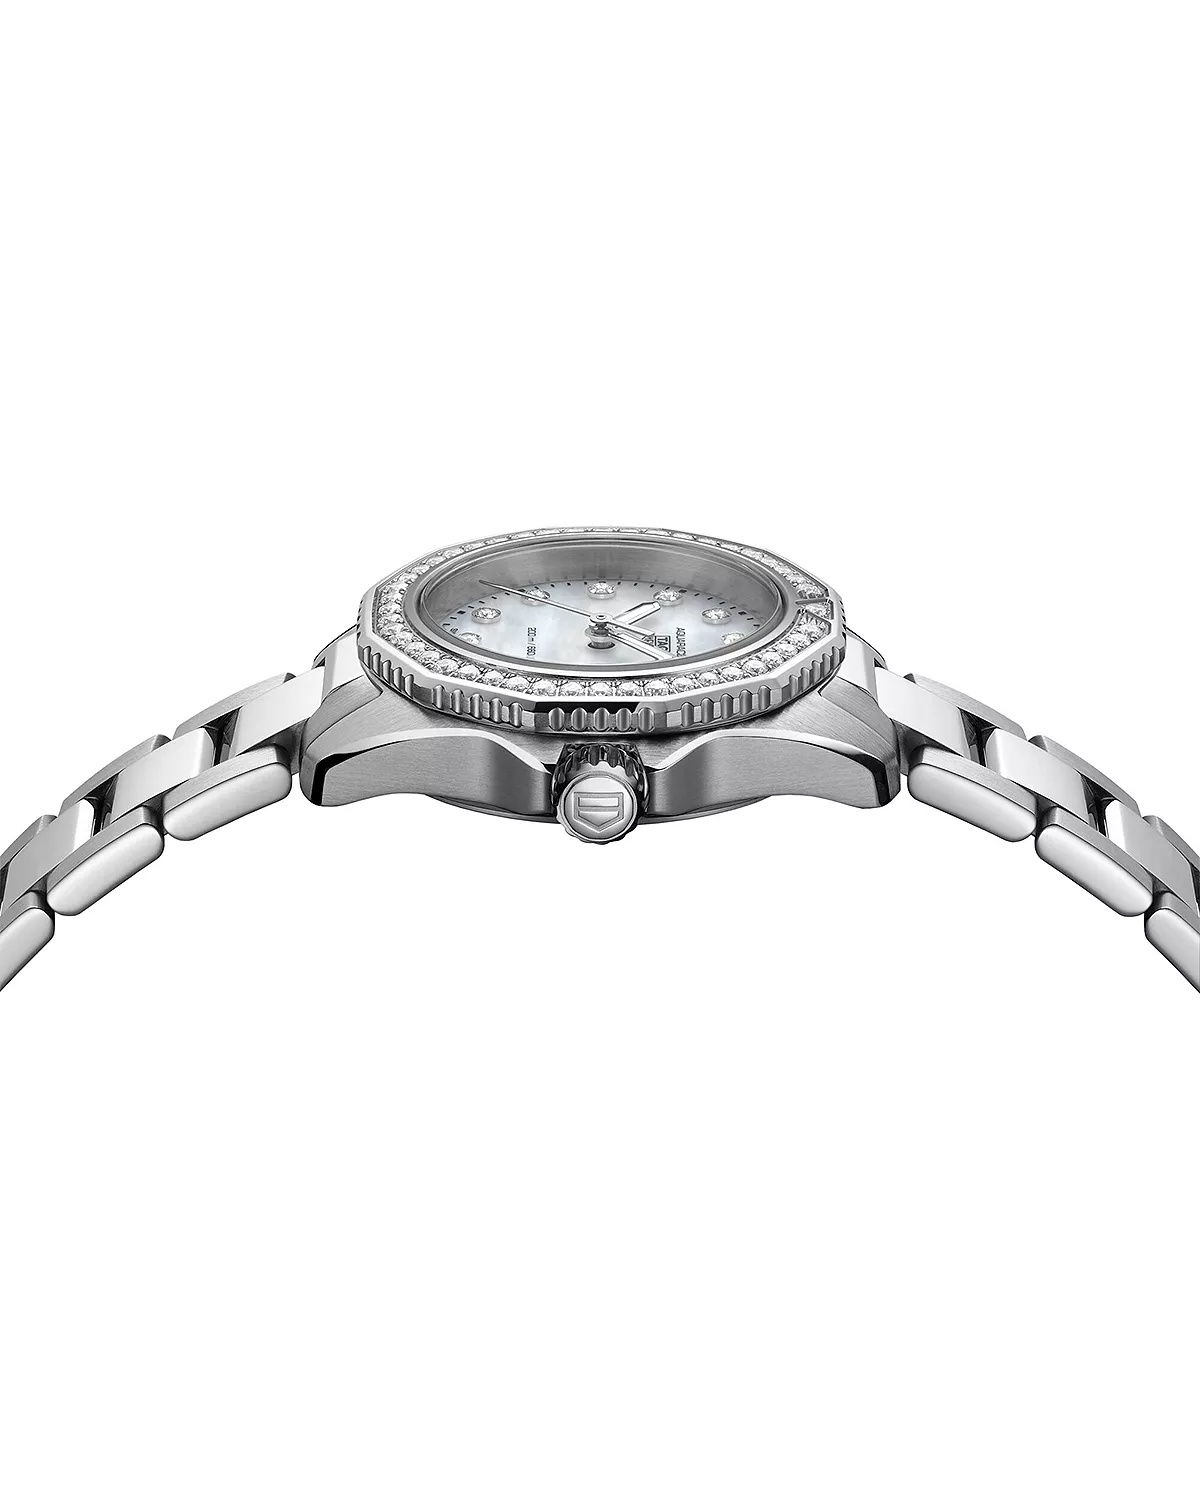 Aquaracer Professional 200 Mother-Of-Pearl and Diamond Watch, 30mm - 4